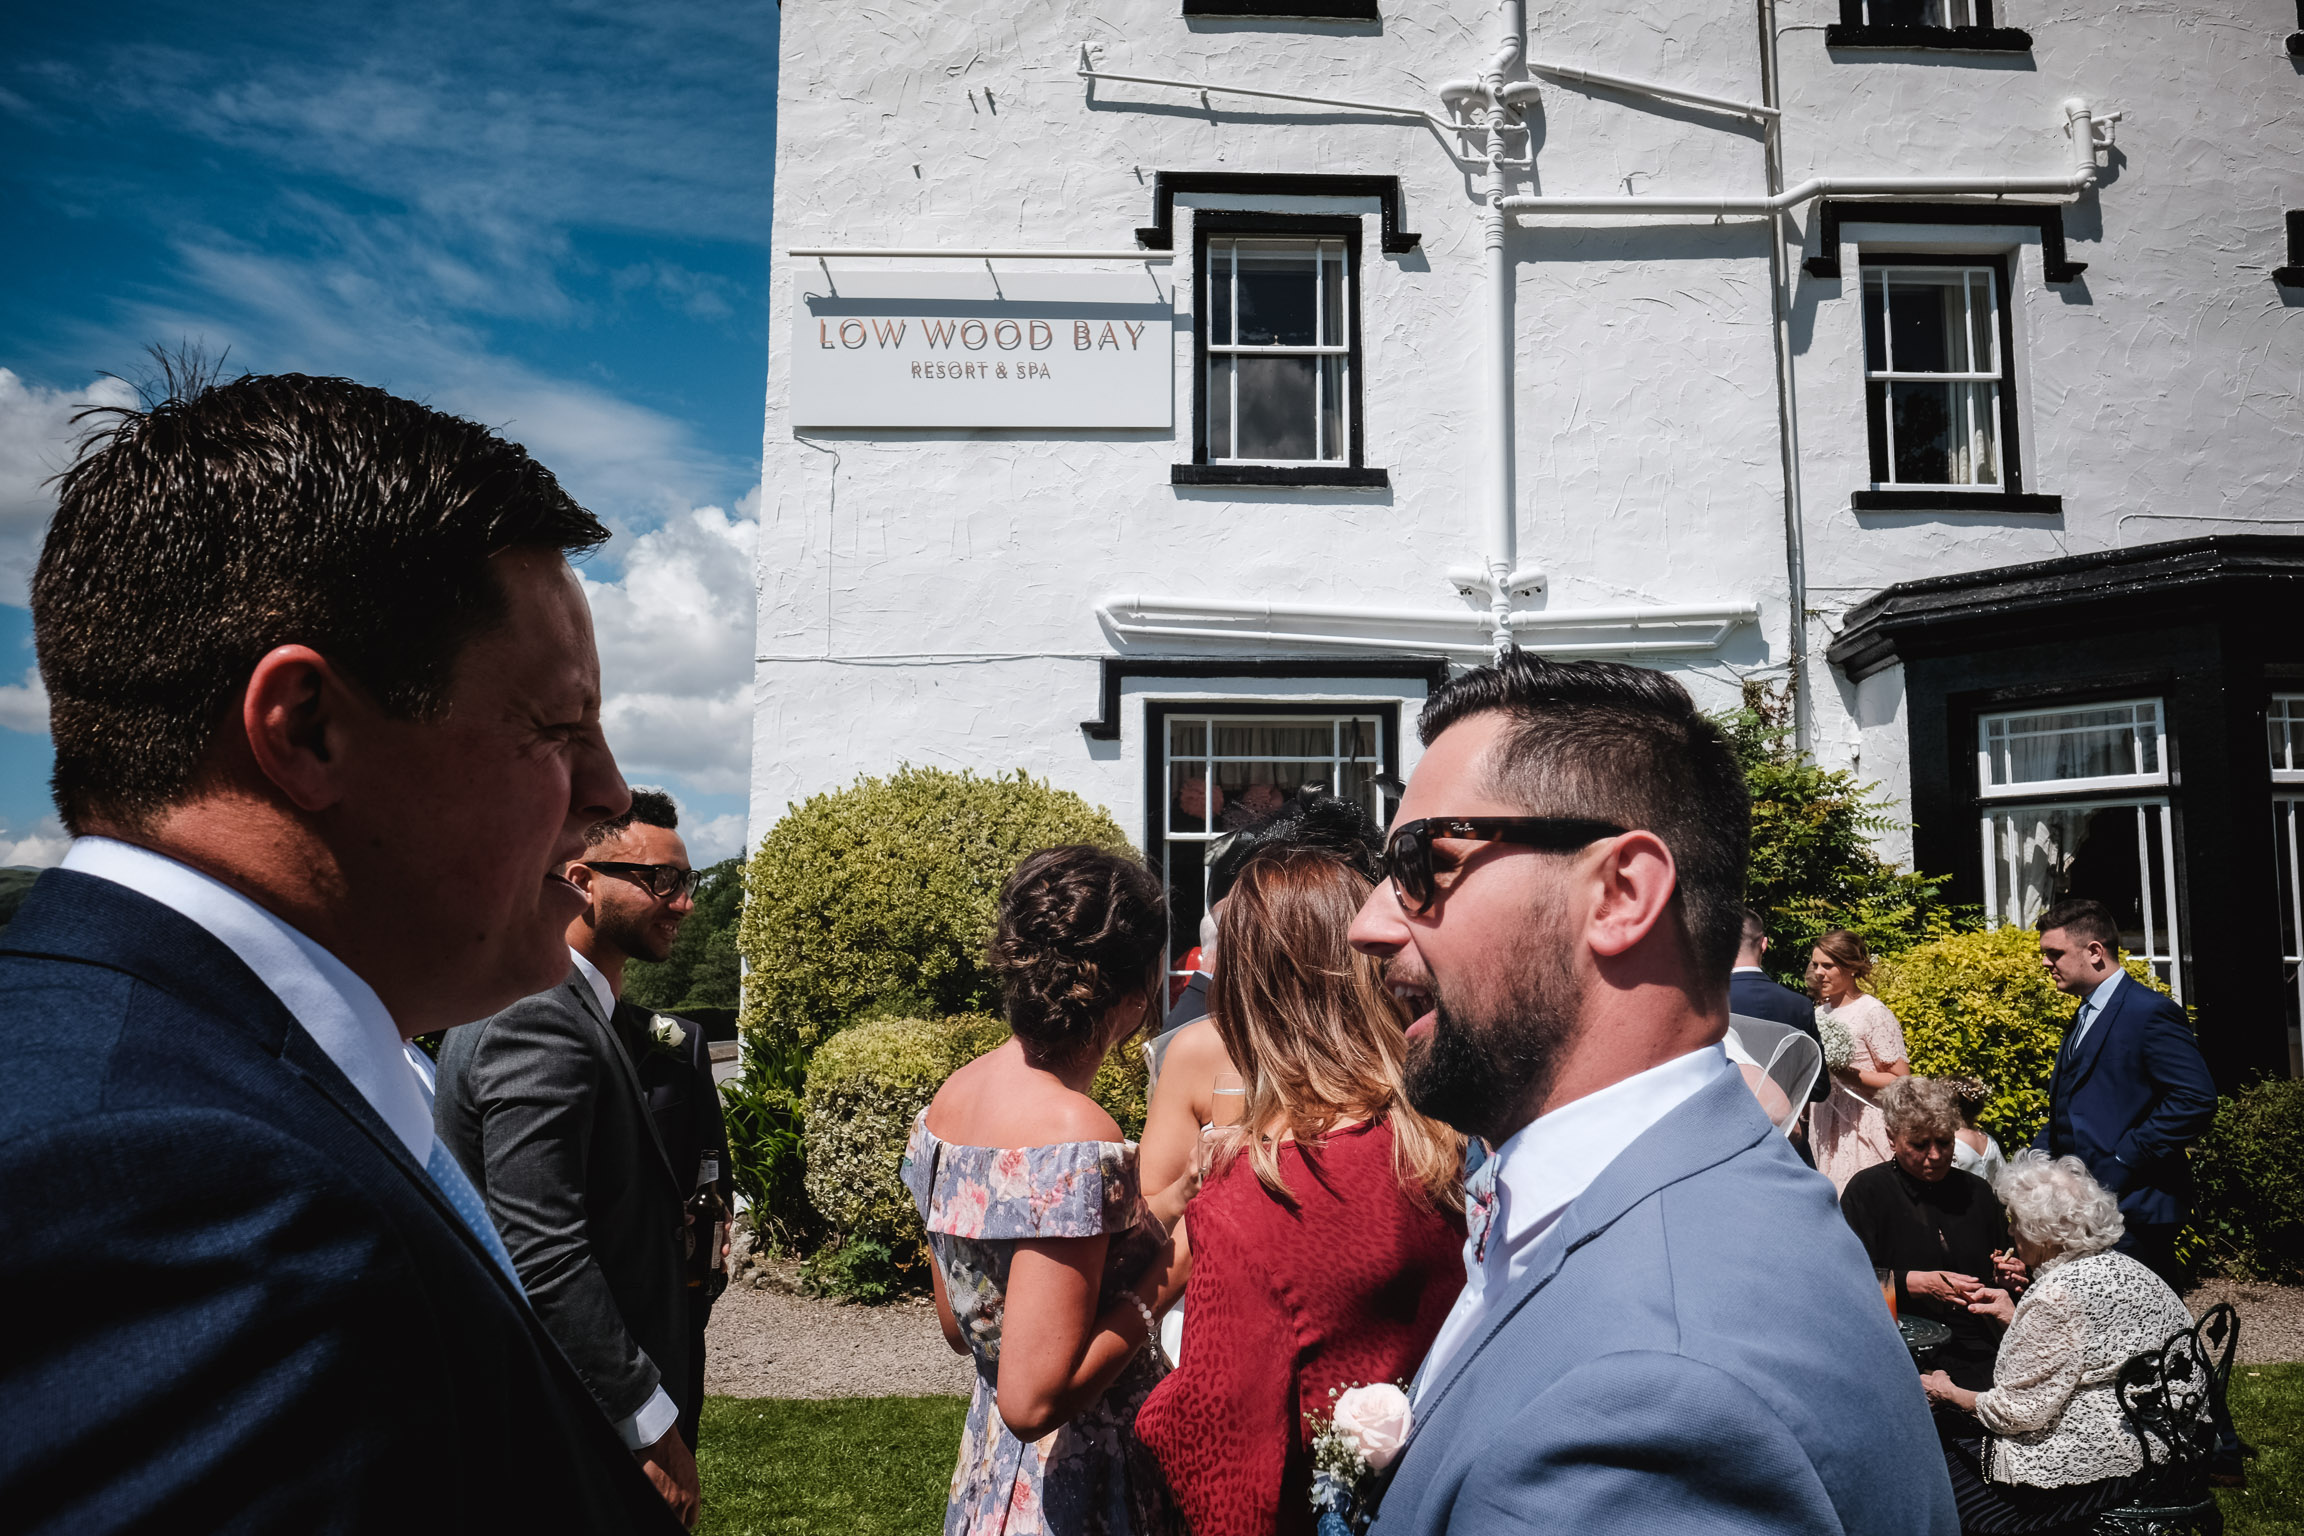 Low wood bay wedding photographer in widermere documentry wedding photography north west cumbria (50 of 131).jpg